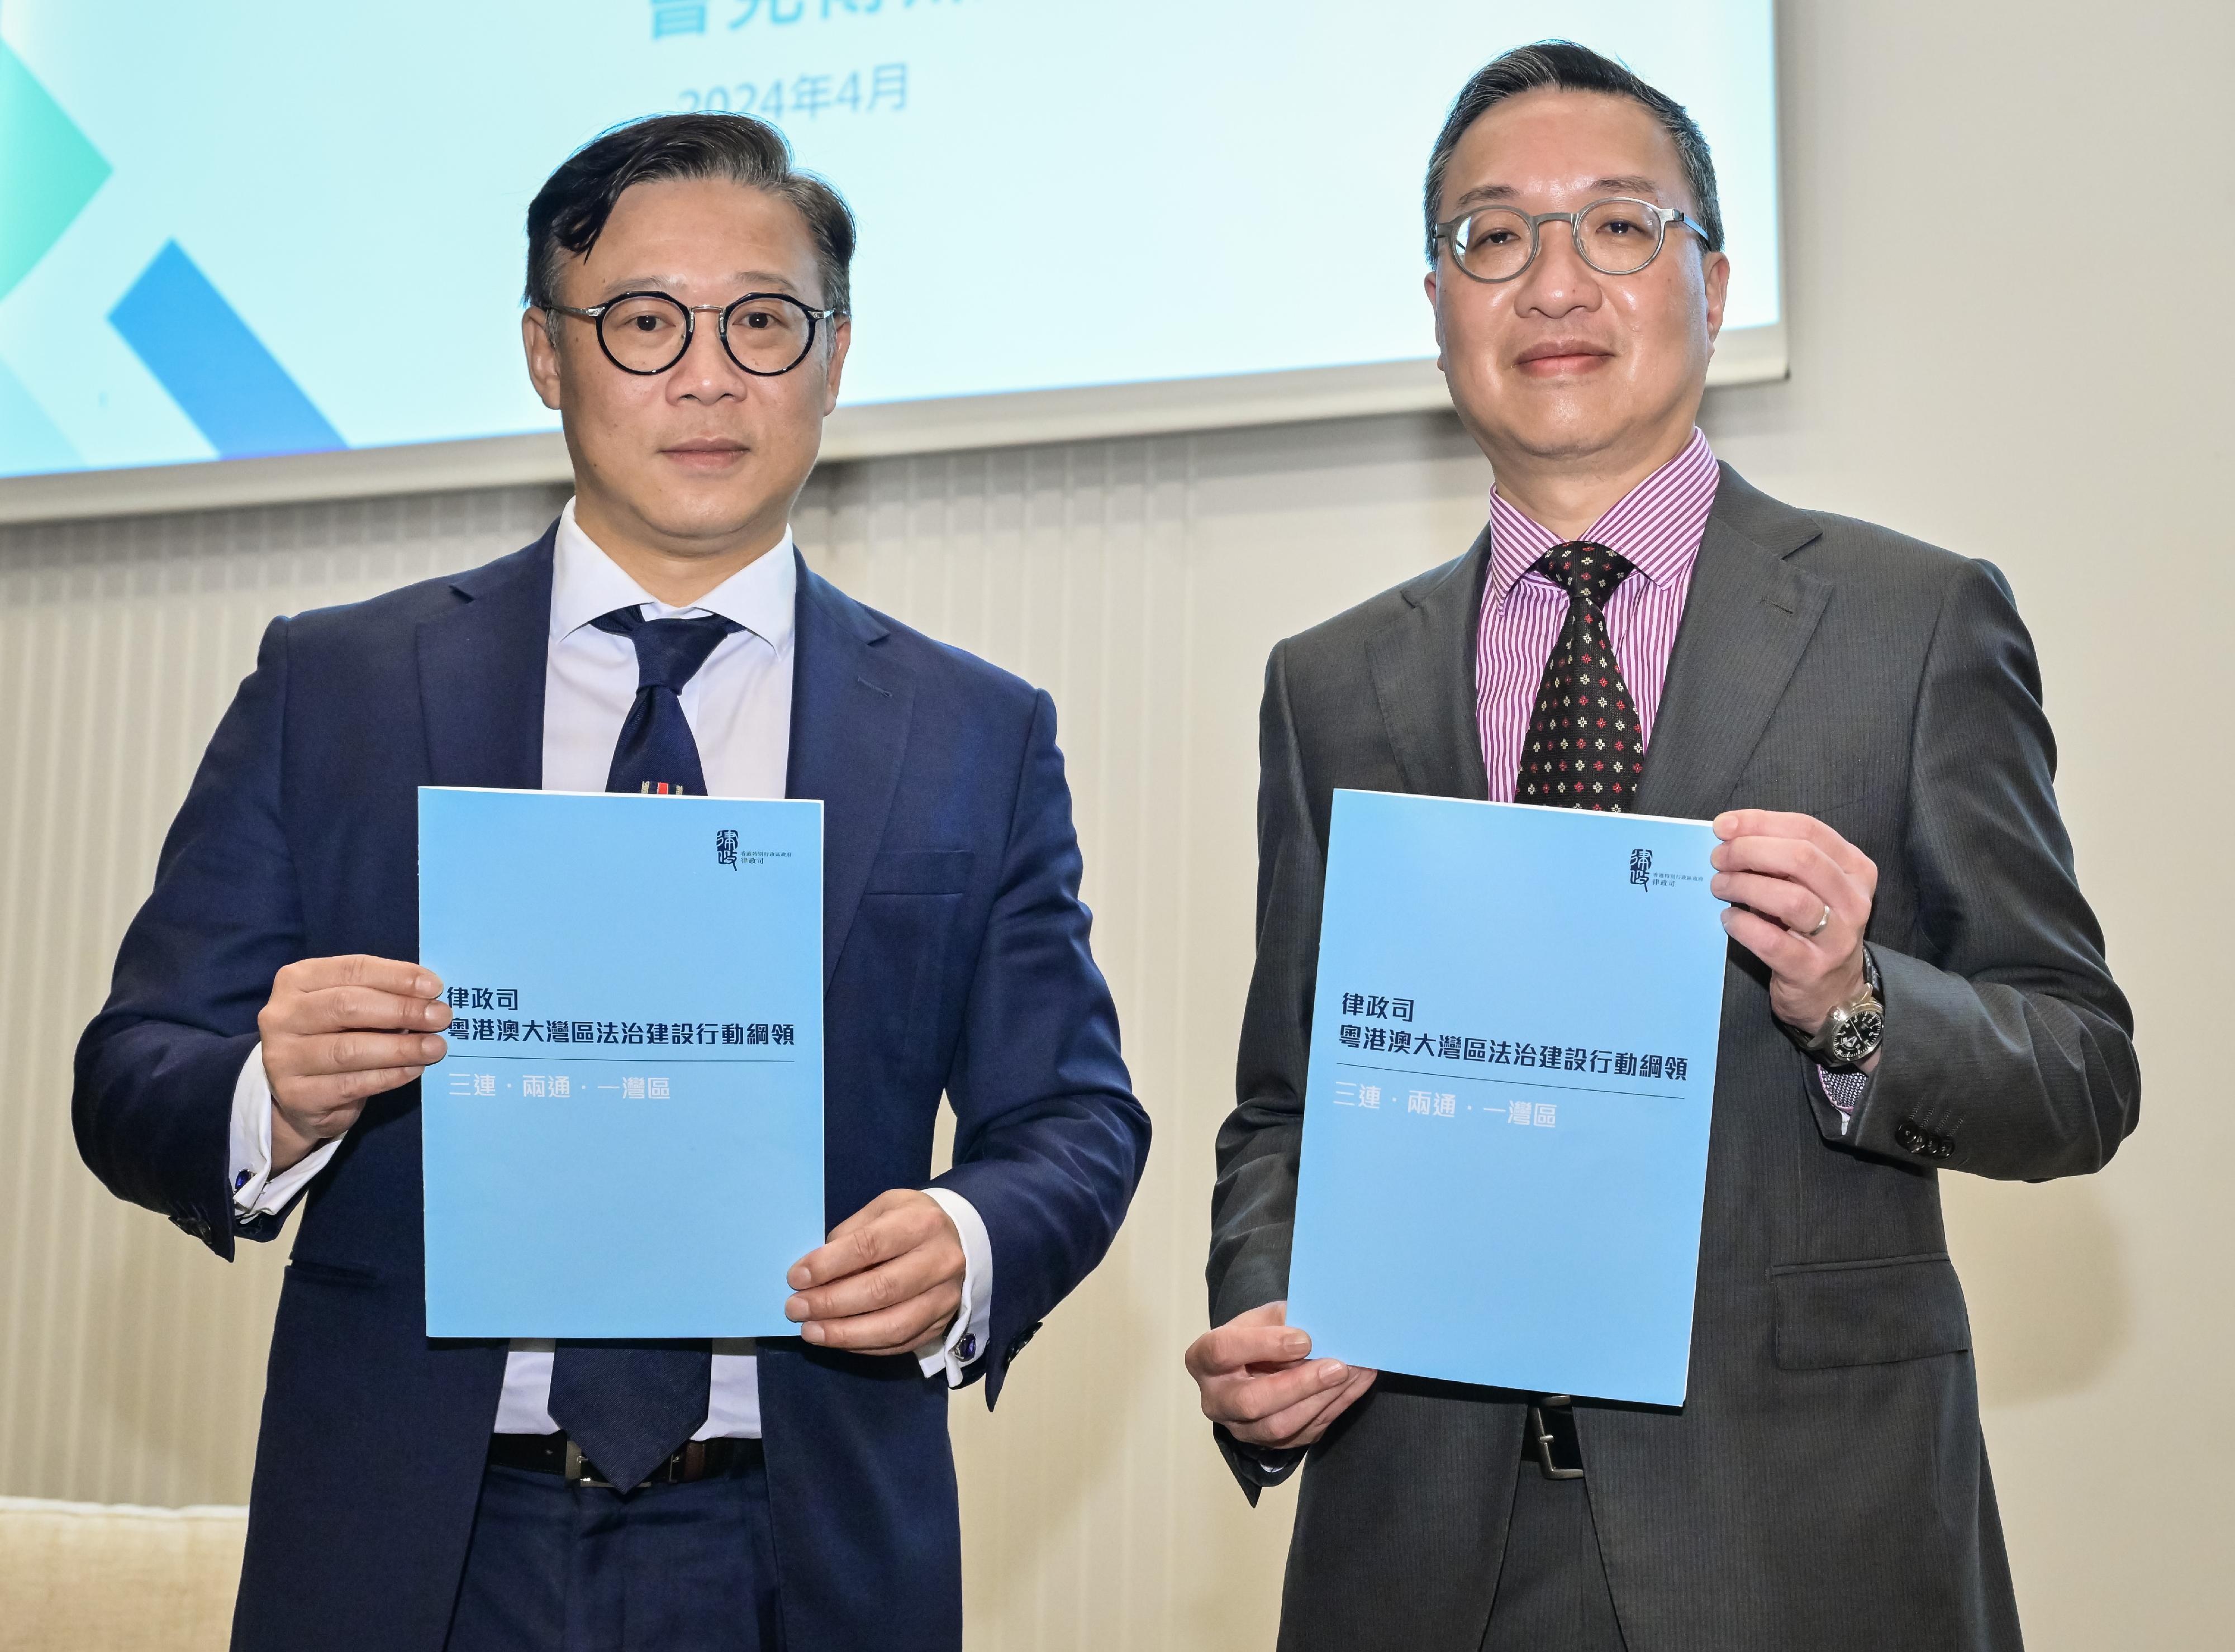 The Department of Justice today (April 12) released the Action Plan on the Construction of Rule of Law in the Guangdong-Hong Kong-Macao Greater Bay Area to set forth the guiding principle, the development direction and specific policy measures on the construction of rule of law in the Guangdong-Hong Kong-Macao Greater Bay Area in the future. Photo shows the Secretary for Justice, Mr Paul Lam, SC (right), and the Deputy Secretary for Justice, Mr Cheung Kwok-kwan (left), with the newly released Action Plan.